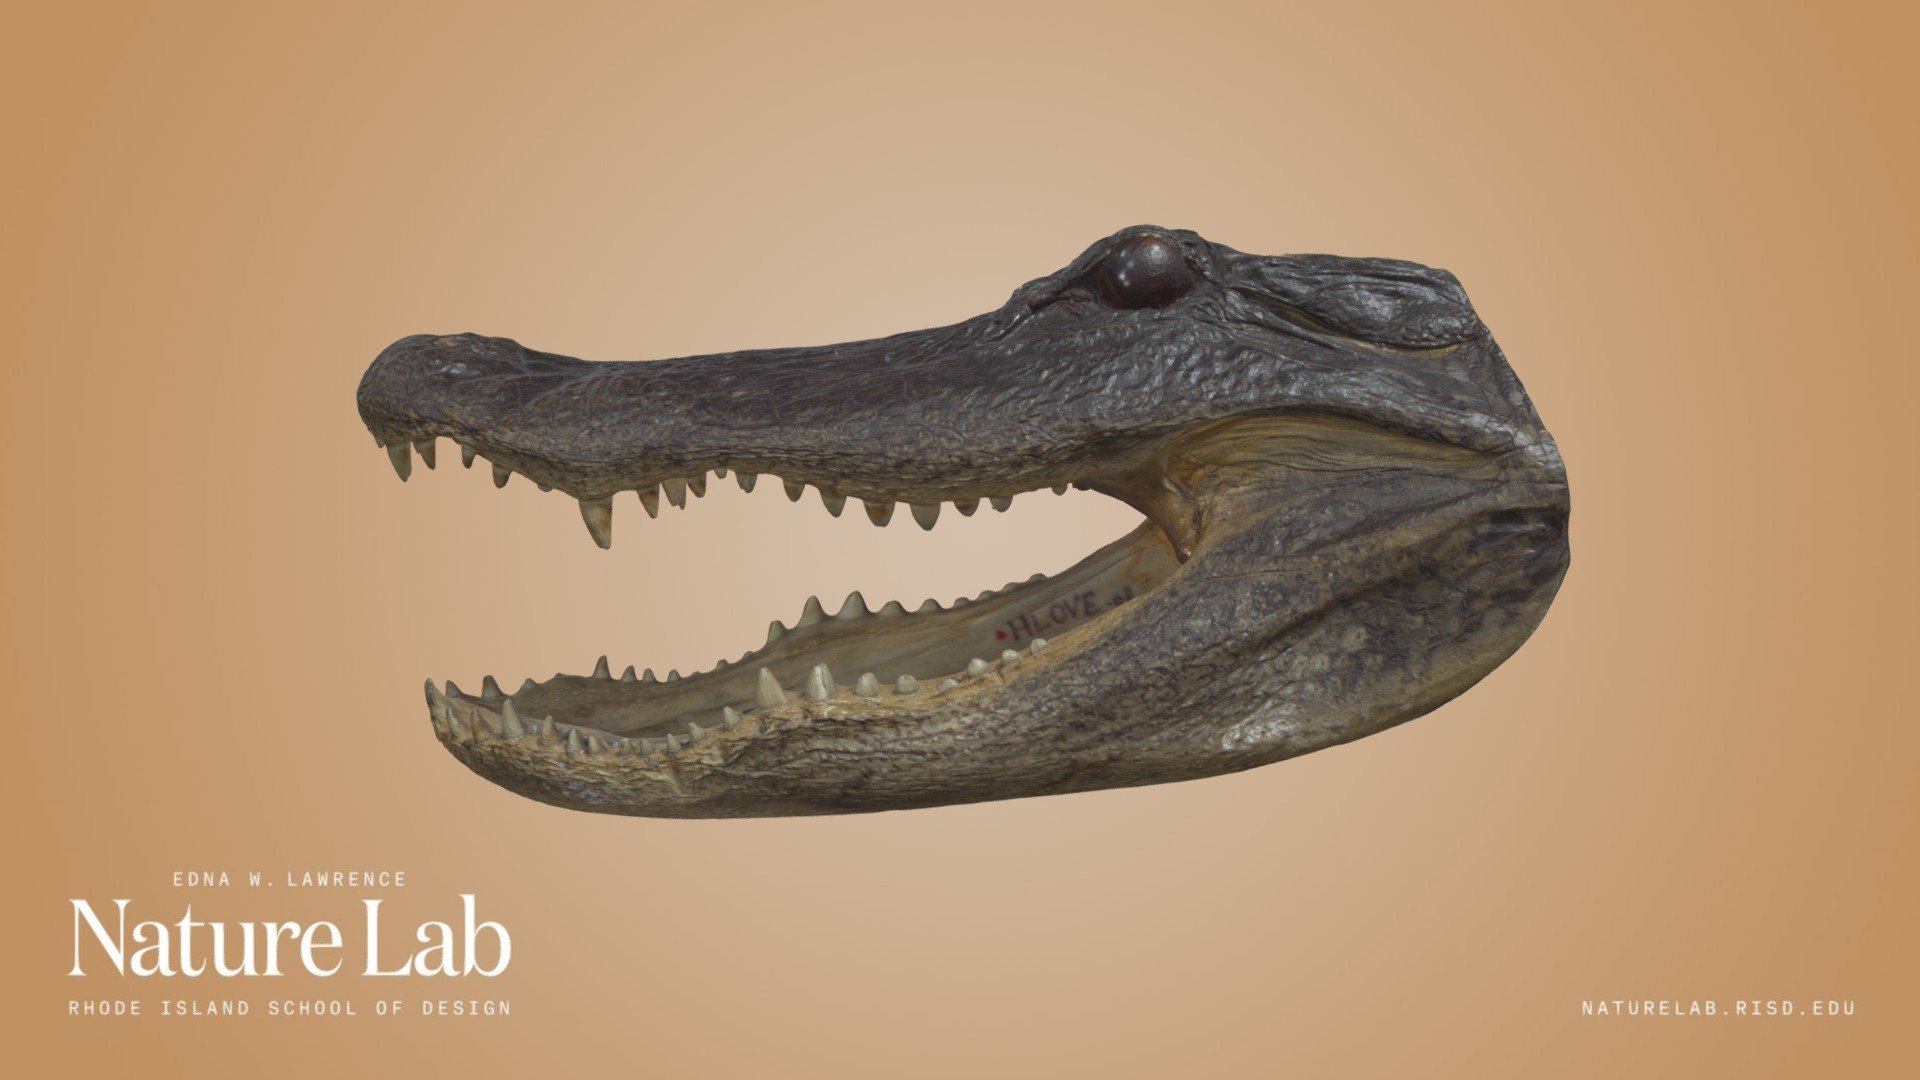 This is the head of an American alligator (Alligator mississippiensis), one of only two extant species in the subfamily Alligatorinae. 

More info here: 
https://animaldiversity.org/accounts/Alligator_mississippiensis/
https://en.wikipedia.org/wiki/American_alligator

Accession Number: HLOVE.08

Captured with Artec Spider 3D Scanner 
https://www.artec3d.com/portable-3d-scanners/artec-spider-v2 - Alligator Head - Download Free 3D model by RISD Nature Lab (@RISDNaturelab) 3d model